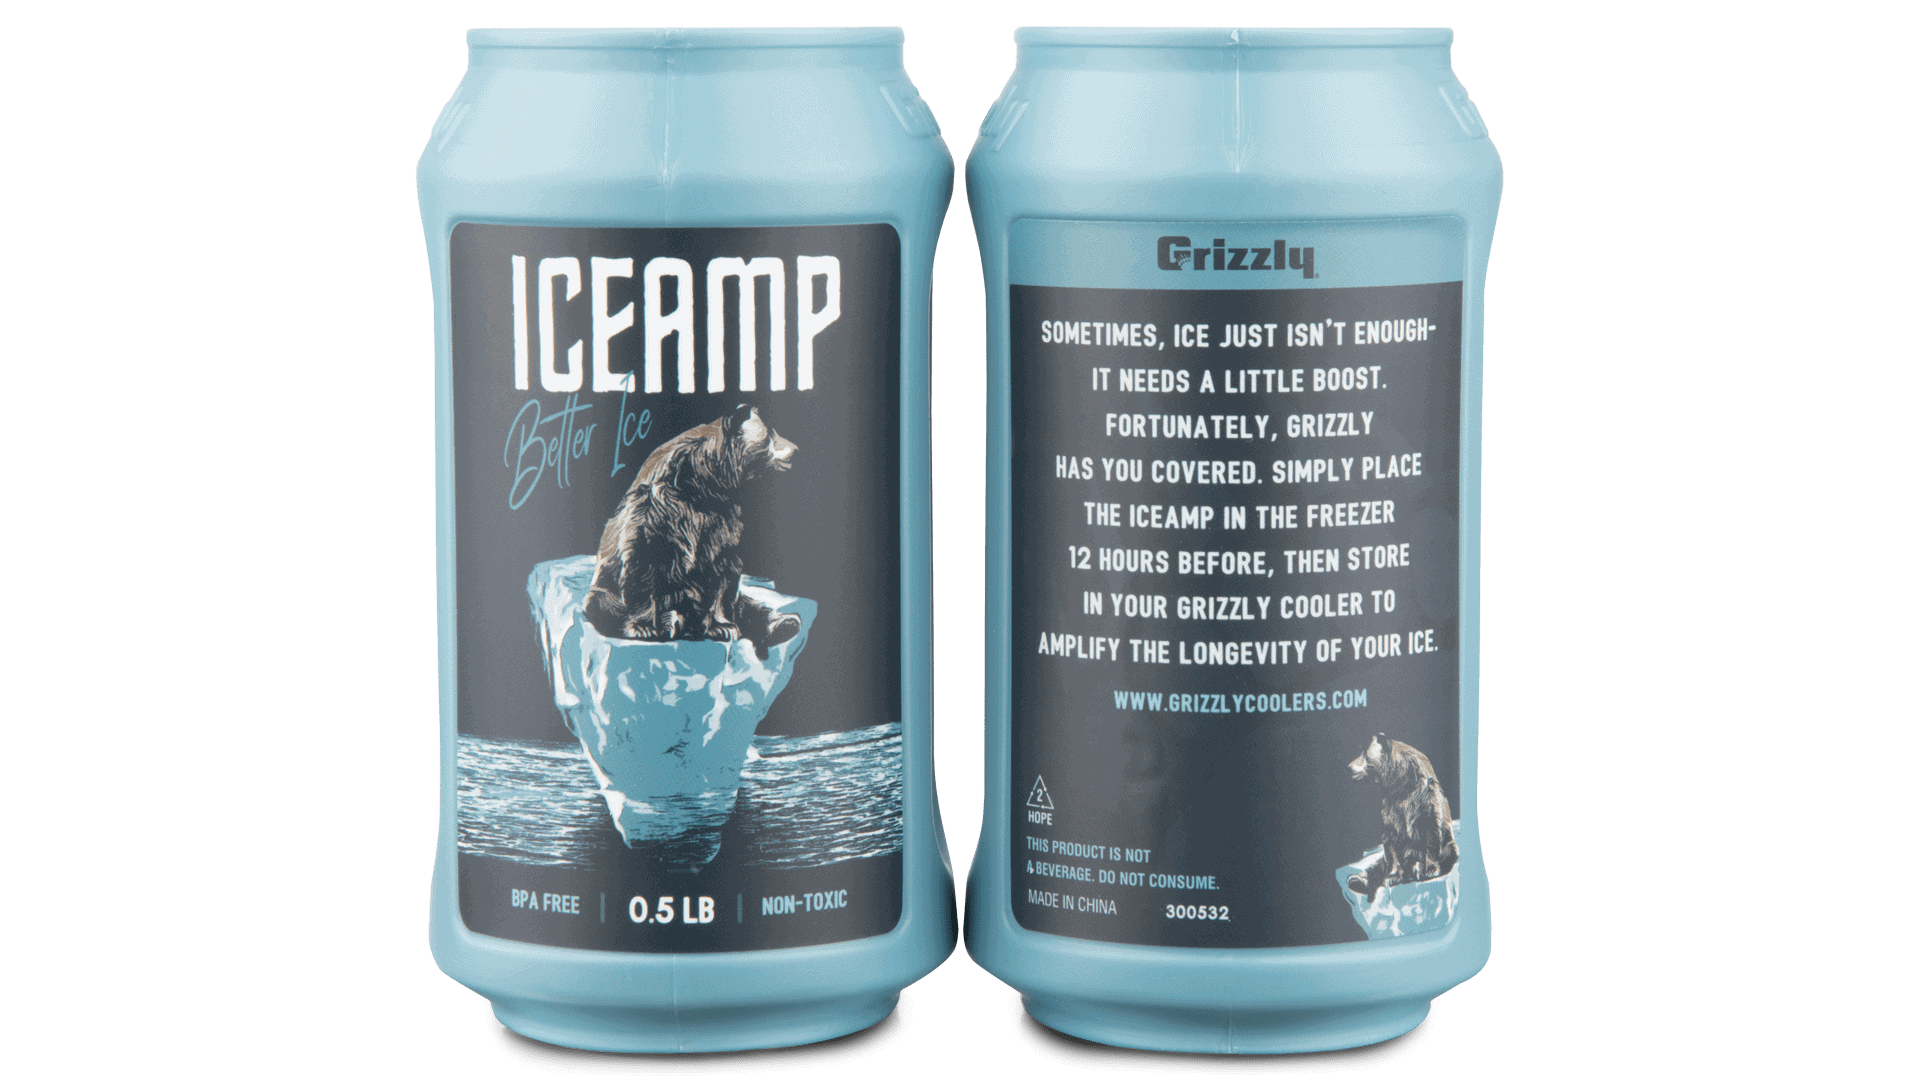 Reusable Ice packs-2 ICEAMPS one facing forward and second showing back label